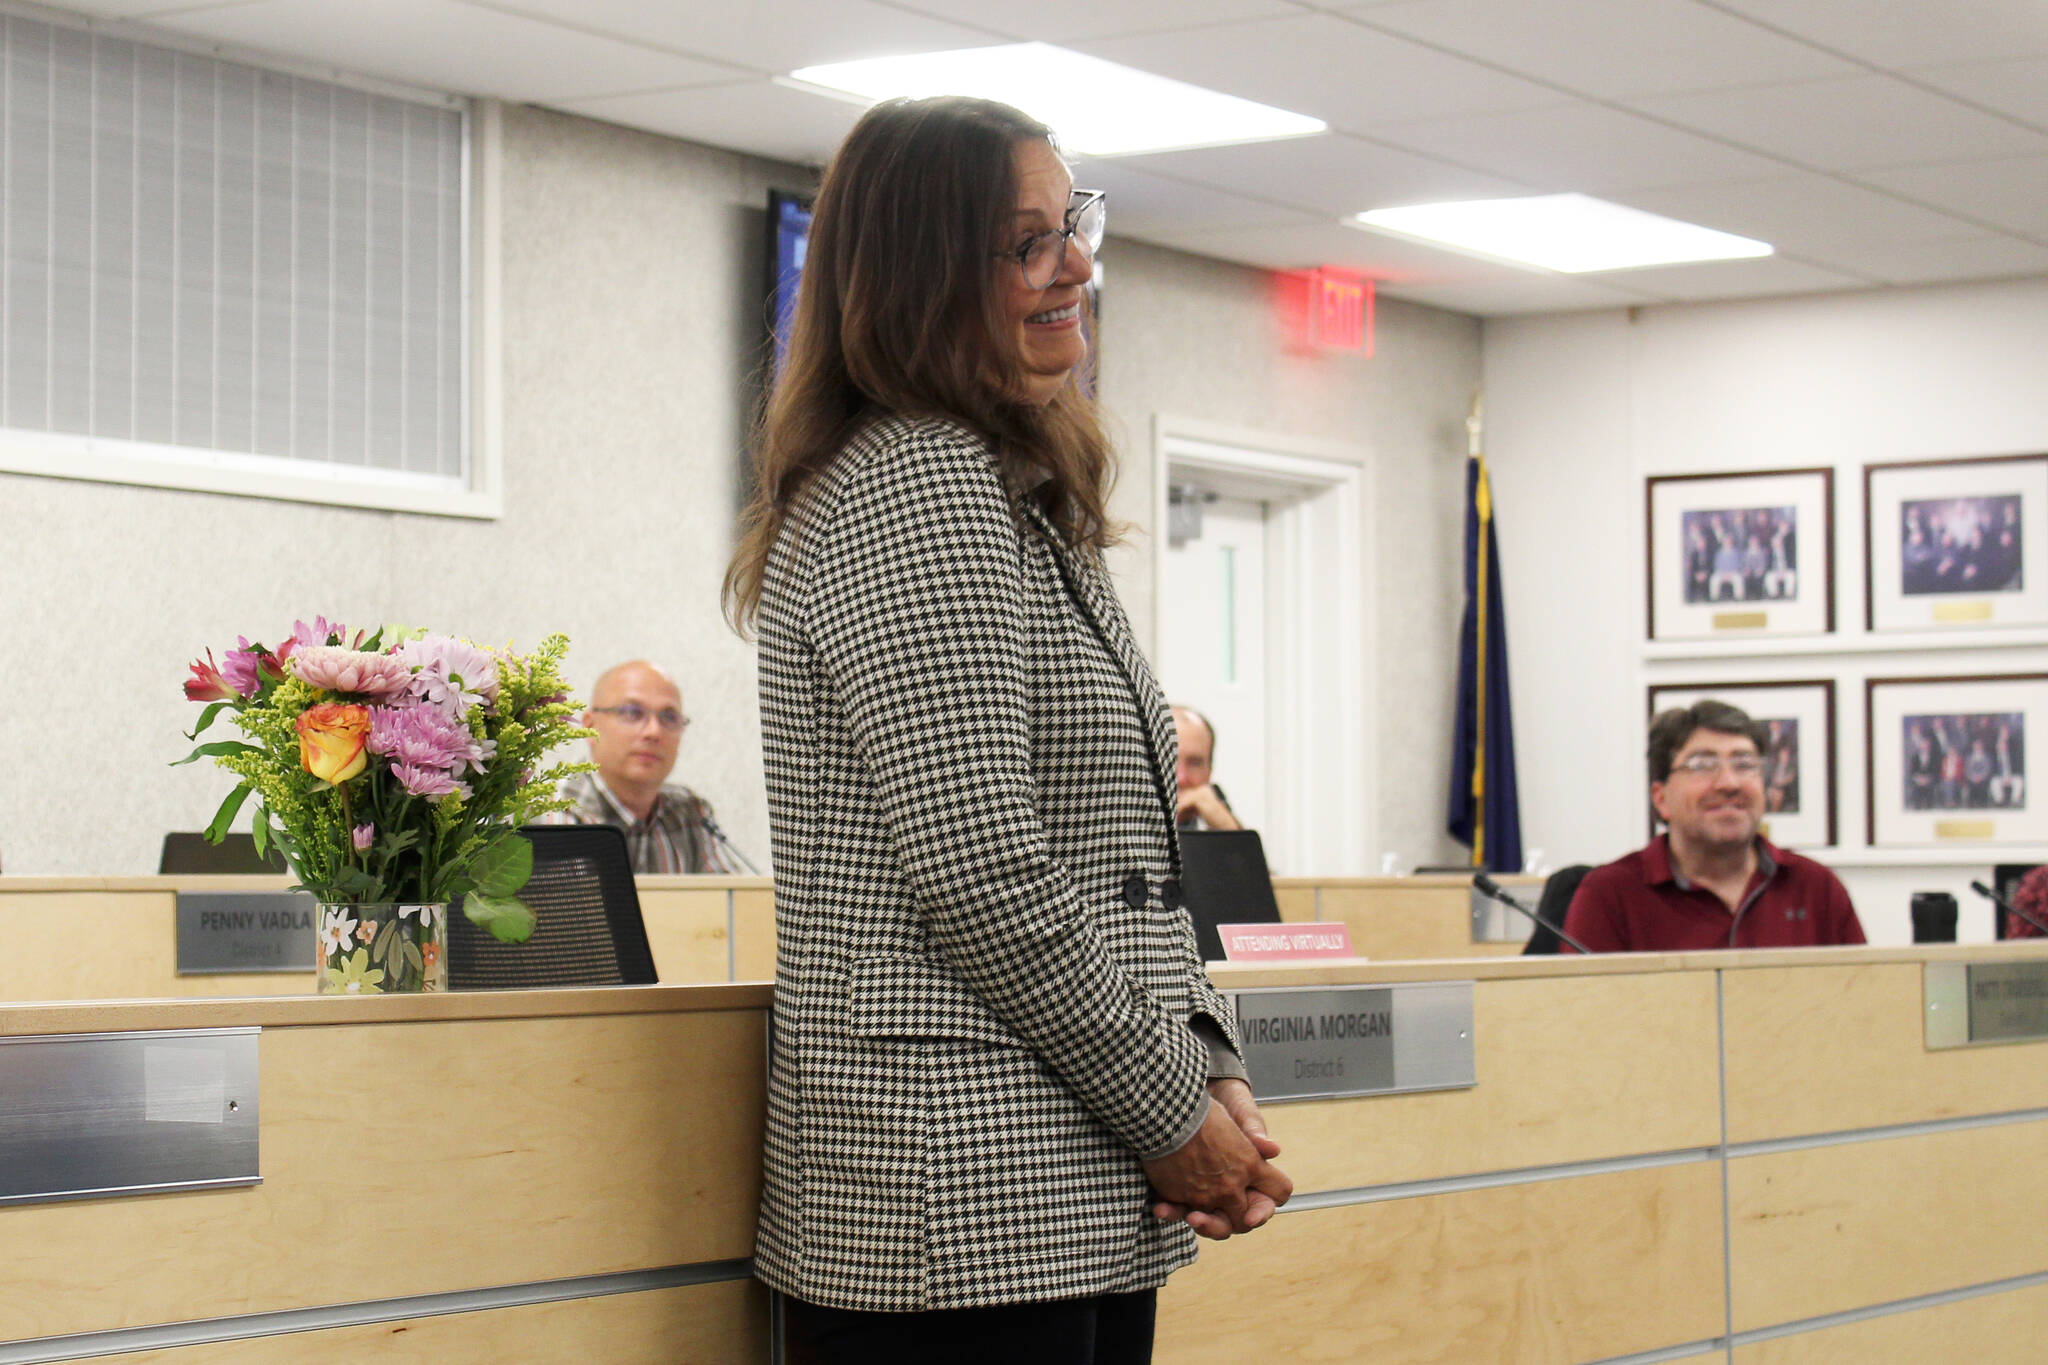 Lisa Gabriel is honored for her 28 years of service to the Kenai Peninsula Borough School District during a Board of Education meeting on Monday, July 11, 2022, in Soldotna, Alaska. (Ashlyn O’Hara/Peninsula Clarion)